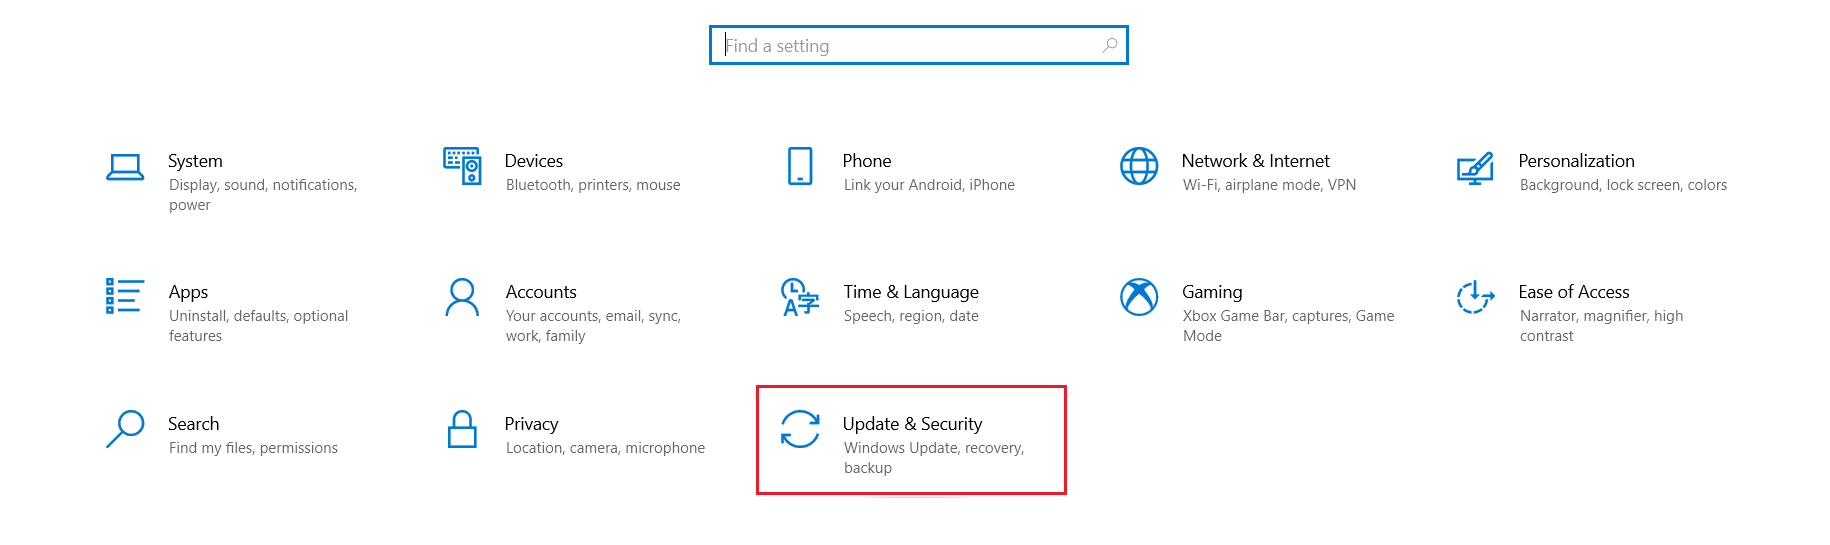 Updates and security option